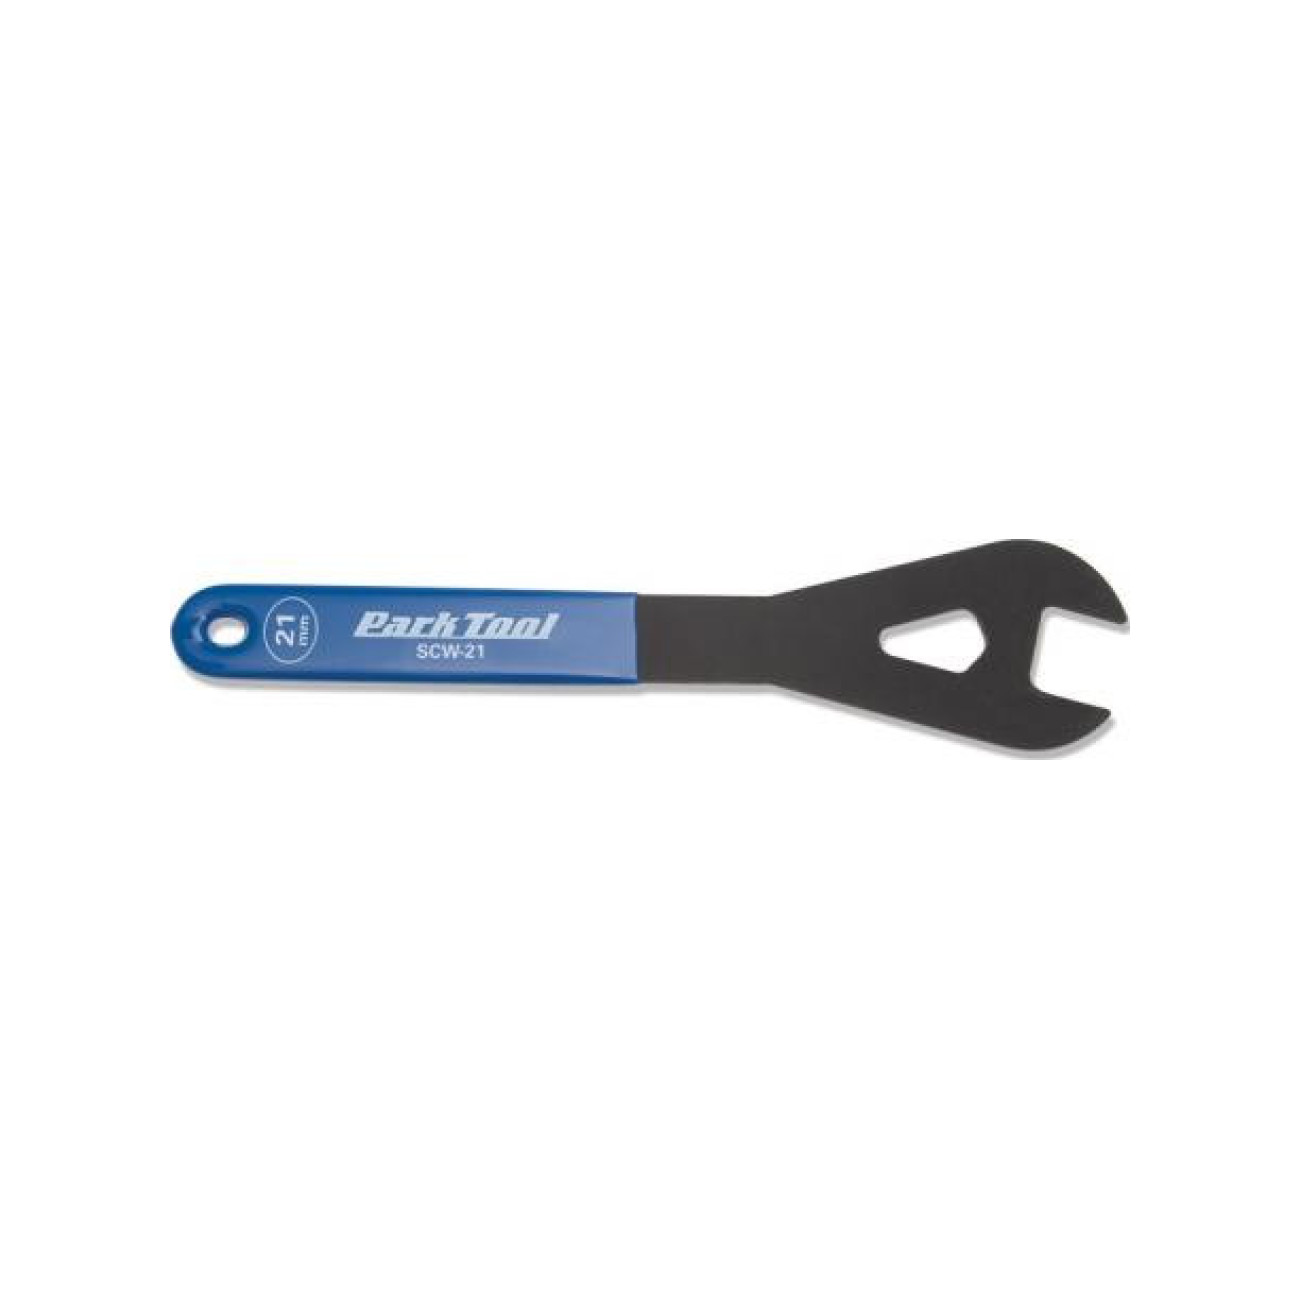 PARK TOOL CONE WRENCH 21 Mm PT-SCW-21 - Kék/fekete